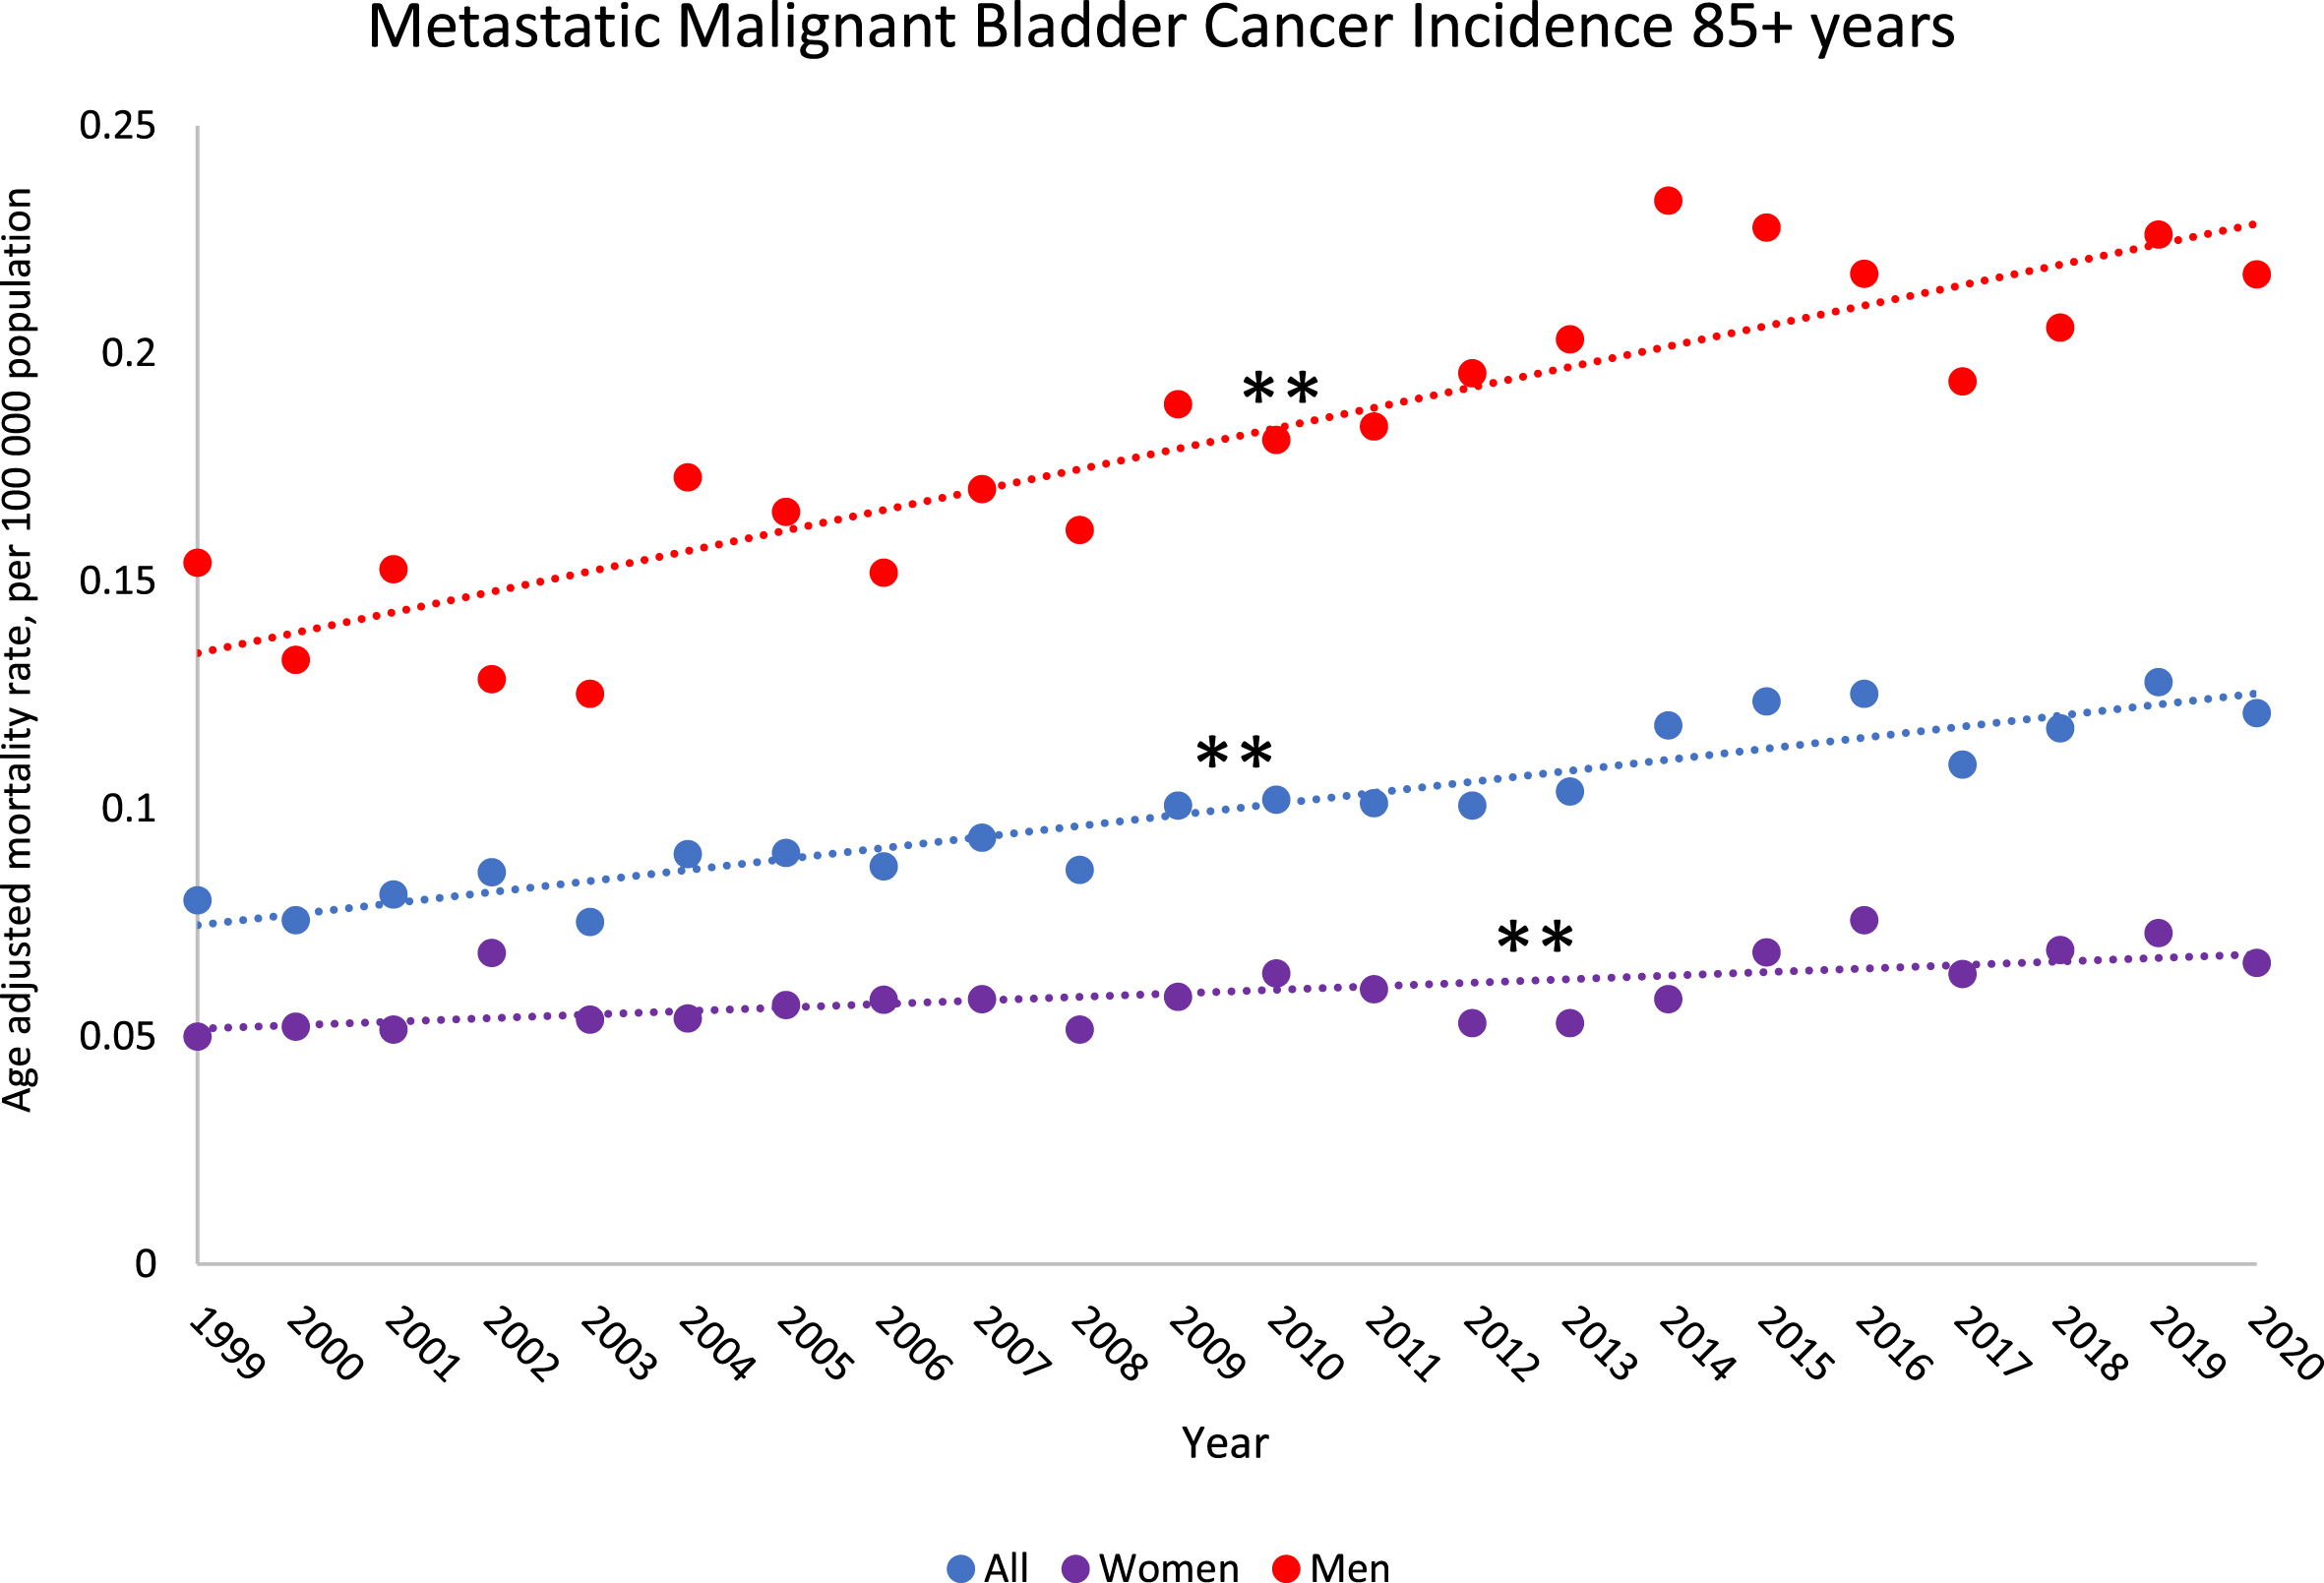 Trends in metastatic malignant bladder cancer incidence rates from 1999–2020 among US population 85 years and older by gender. Observed rates are presented per 100,000 population and represented by “•”. Modeled trends are represented by “—”. ** indicates the p-value is significant after Holm-Bonferroni correction. * indicates the p-value is < 0.05, but not significant after Holm-Bonferroni correction.